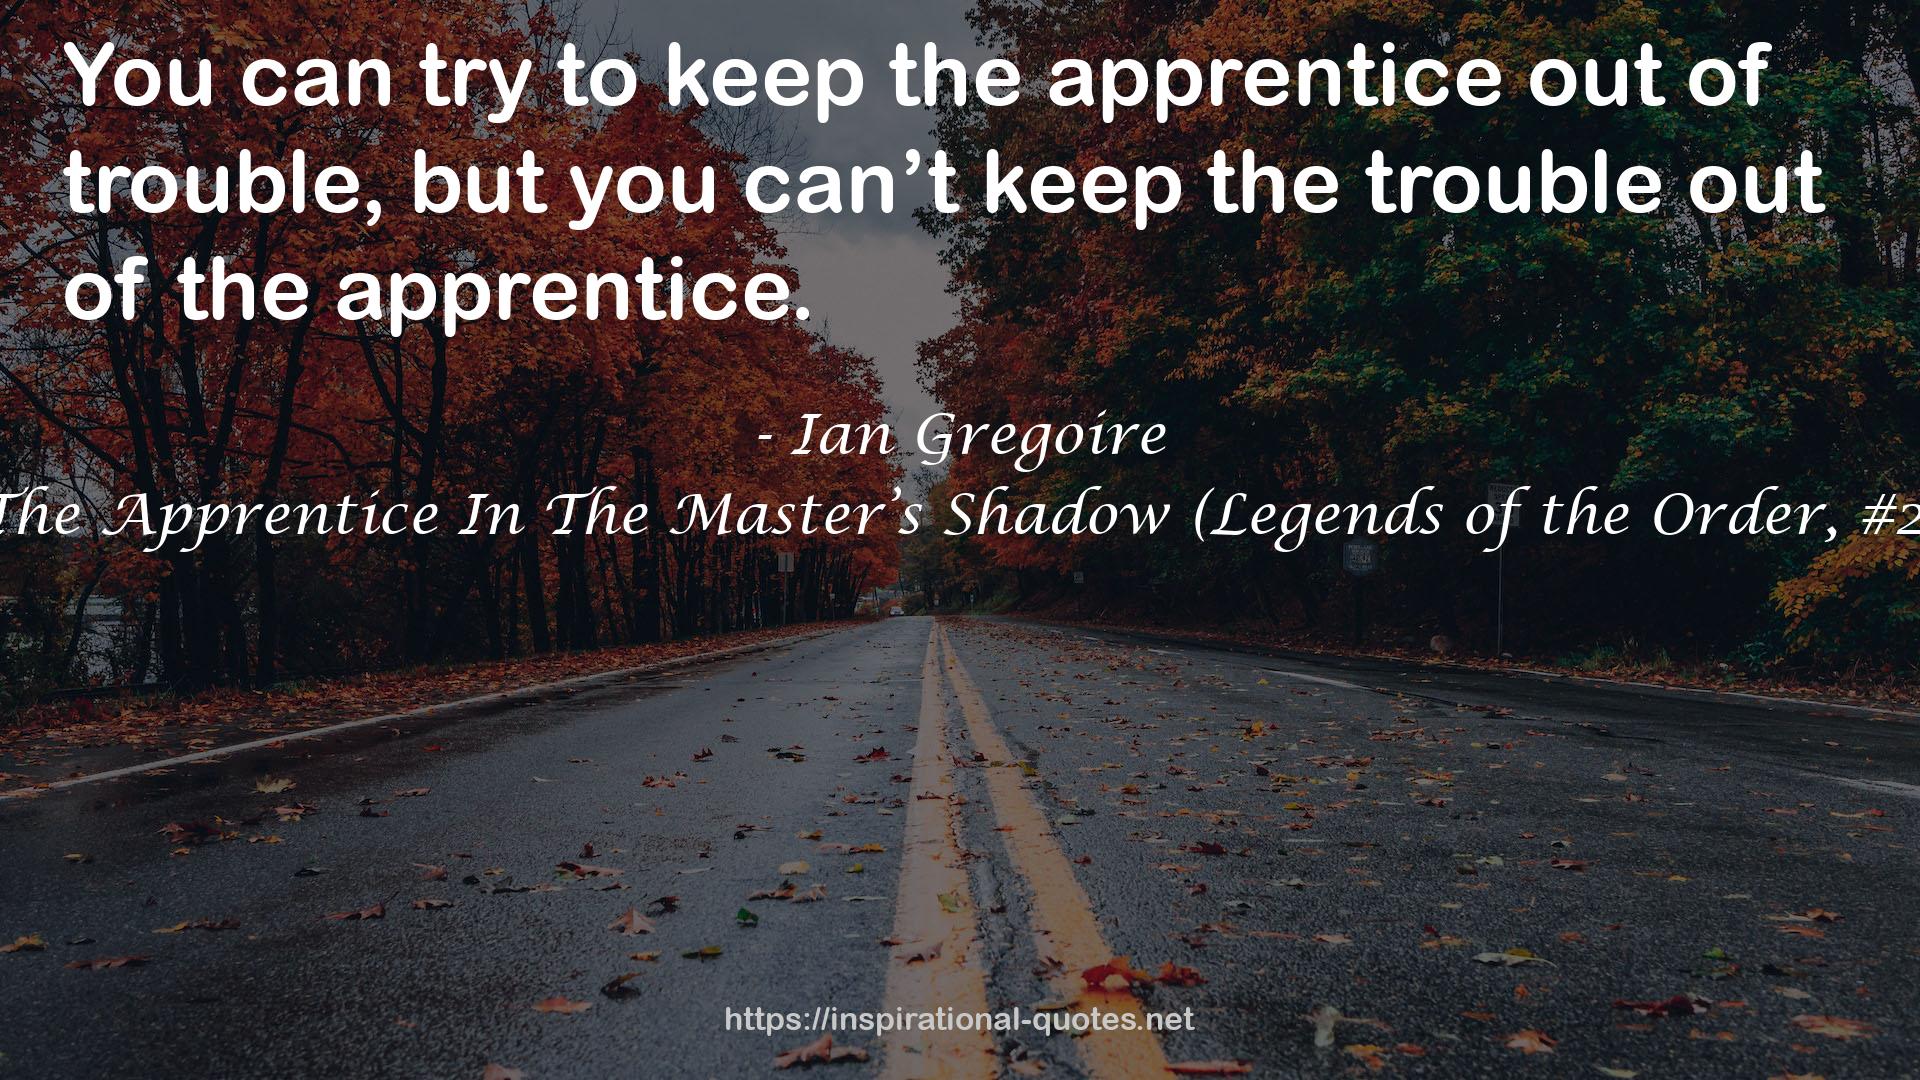 The Apprentice In The Master’s Shadow (Legends of the Order, #2) QUOTES